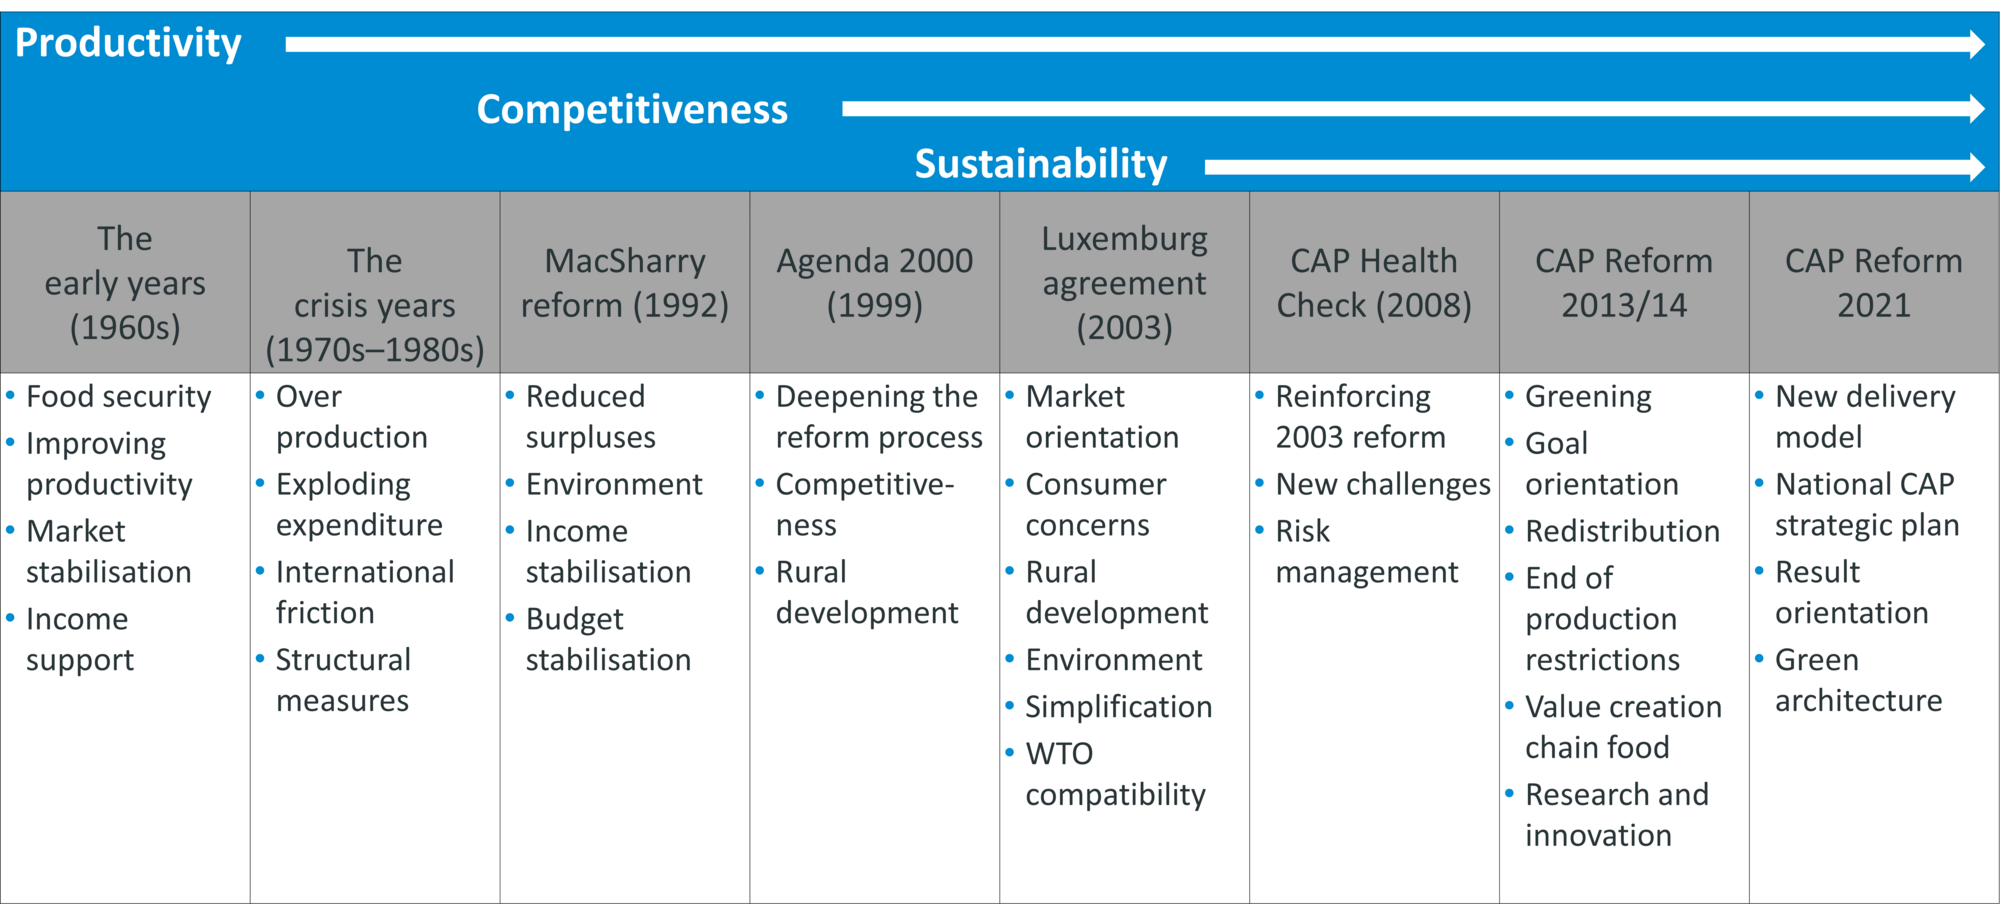 Phases and reforms of the CAP